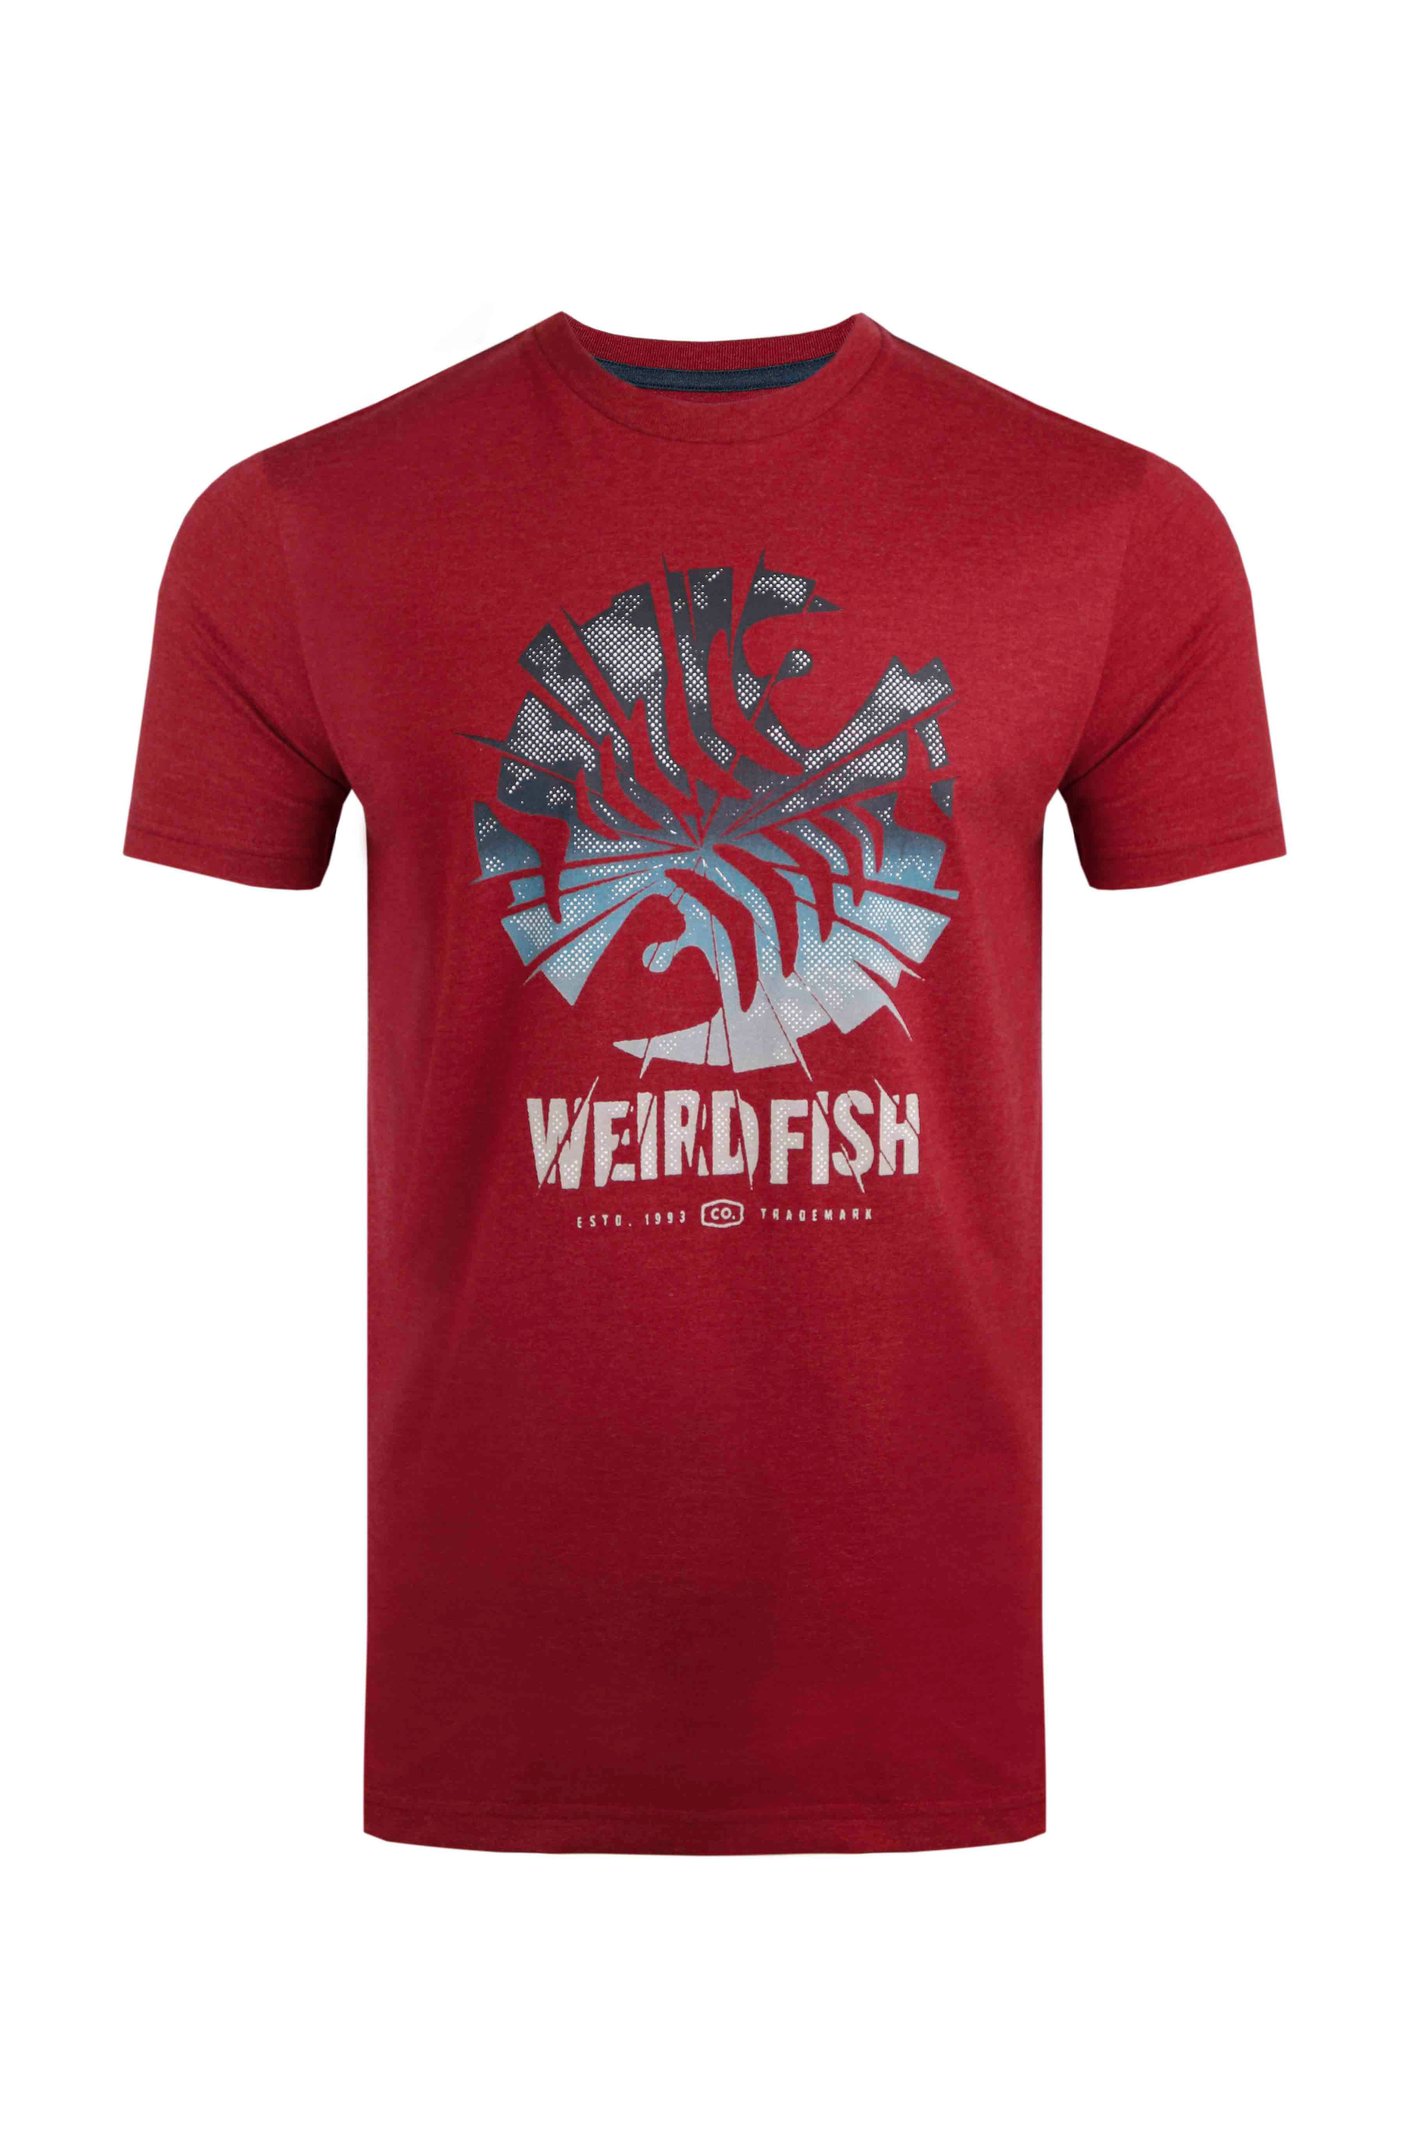 Weird Fish Shatter Graphic T-Shirt Foxberry Size M